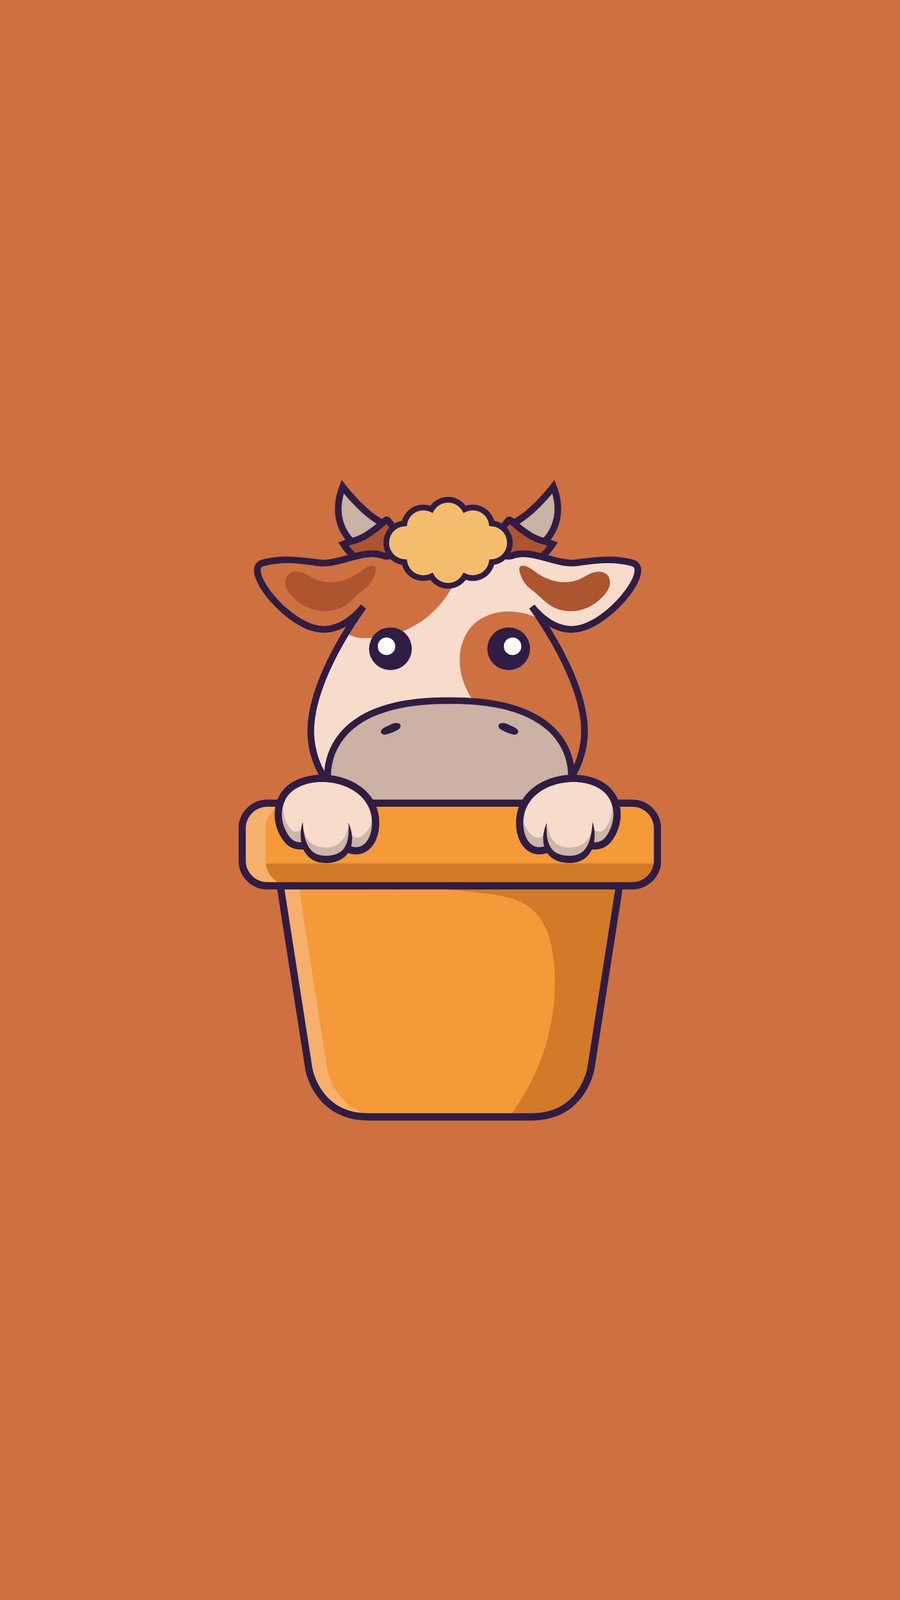 Cute Cow Wallpaper 45 images